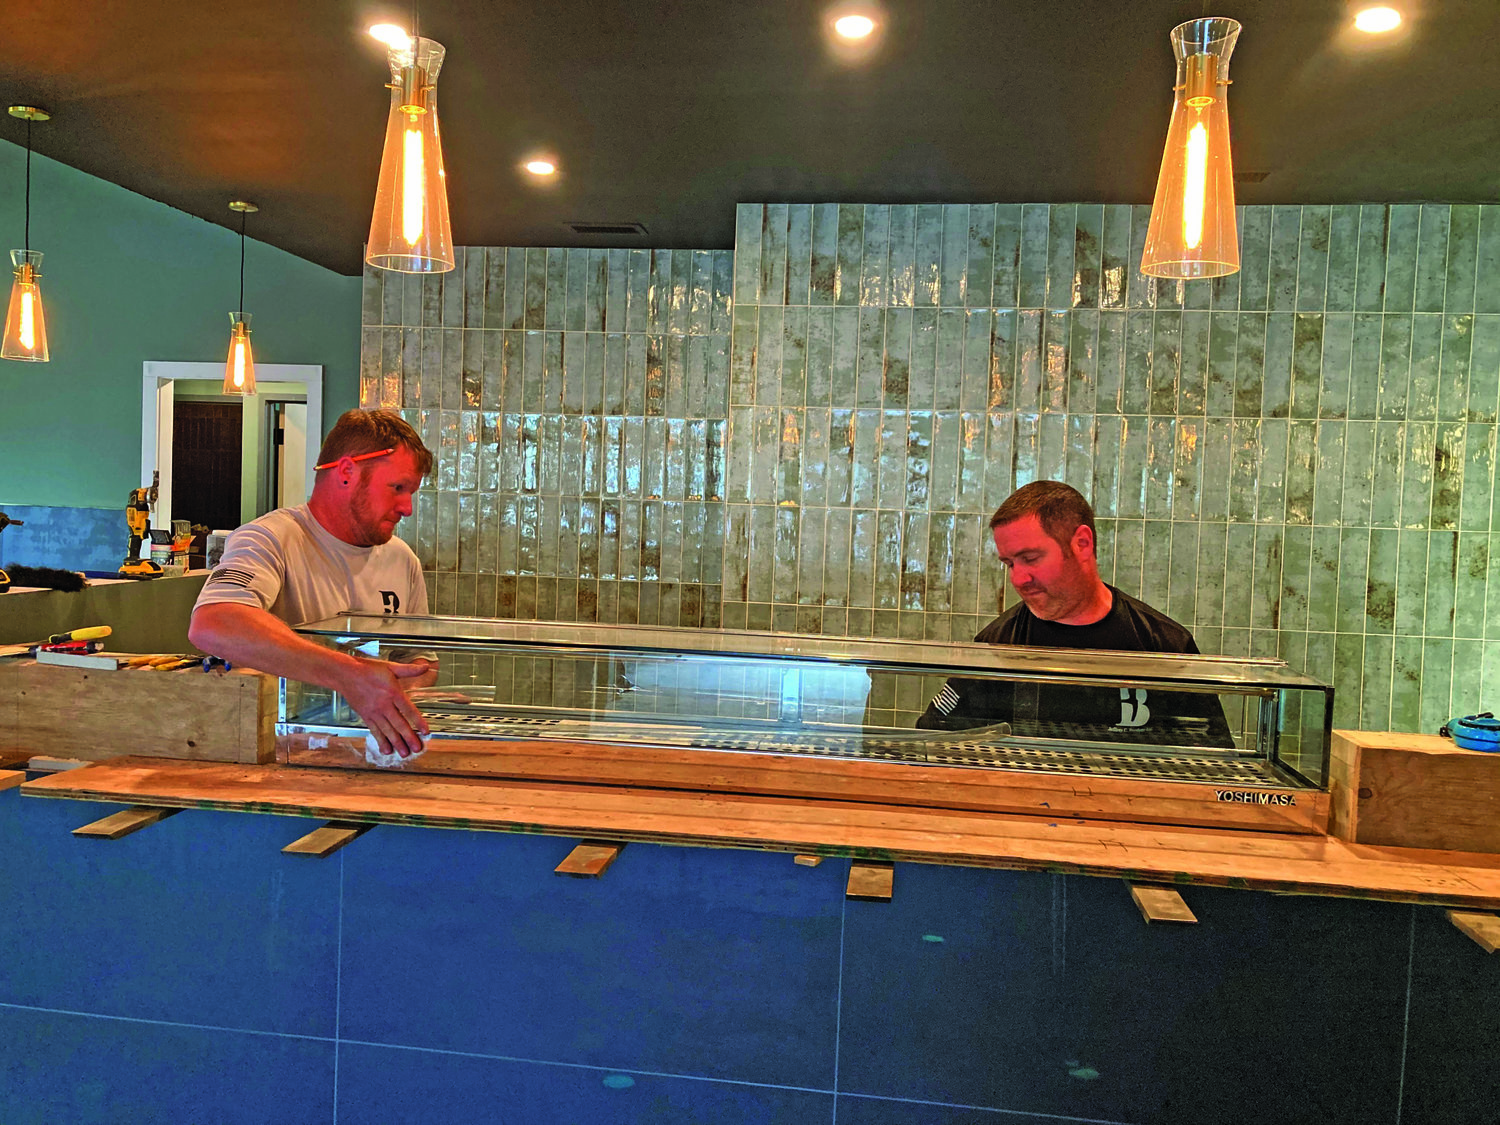 Jeff Burdette, right, and Casey Scritchfield of general contractor Burdette put a new sushi case in place at the new Kawaii Tori Sushi restaurant, set to open in mid-November in Yardley Borough.